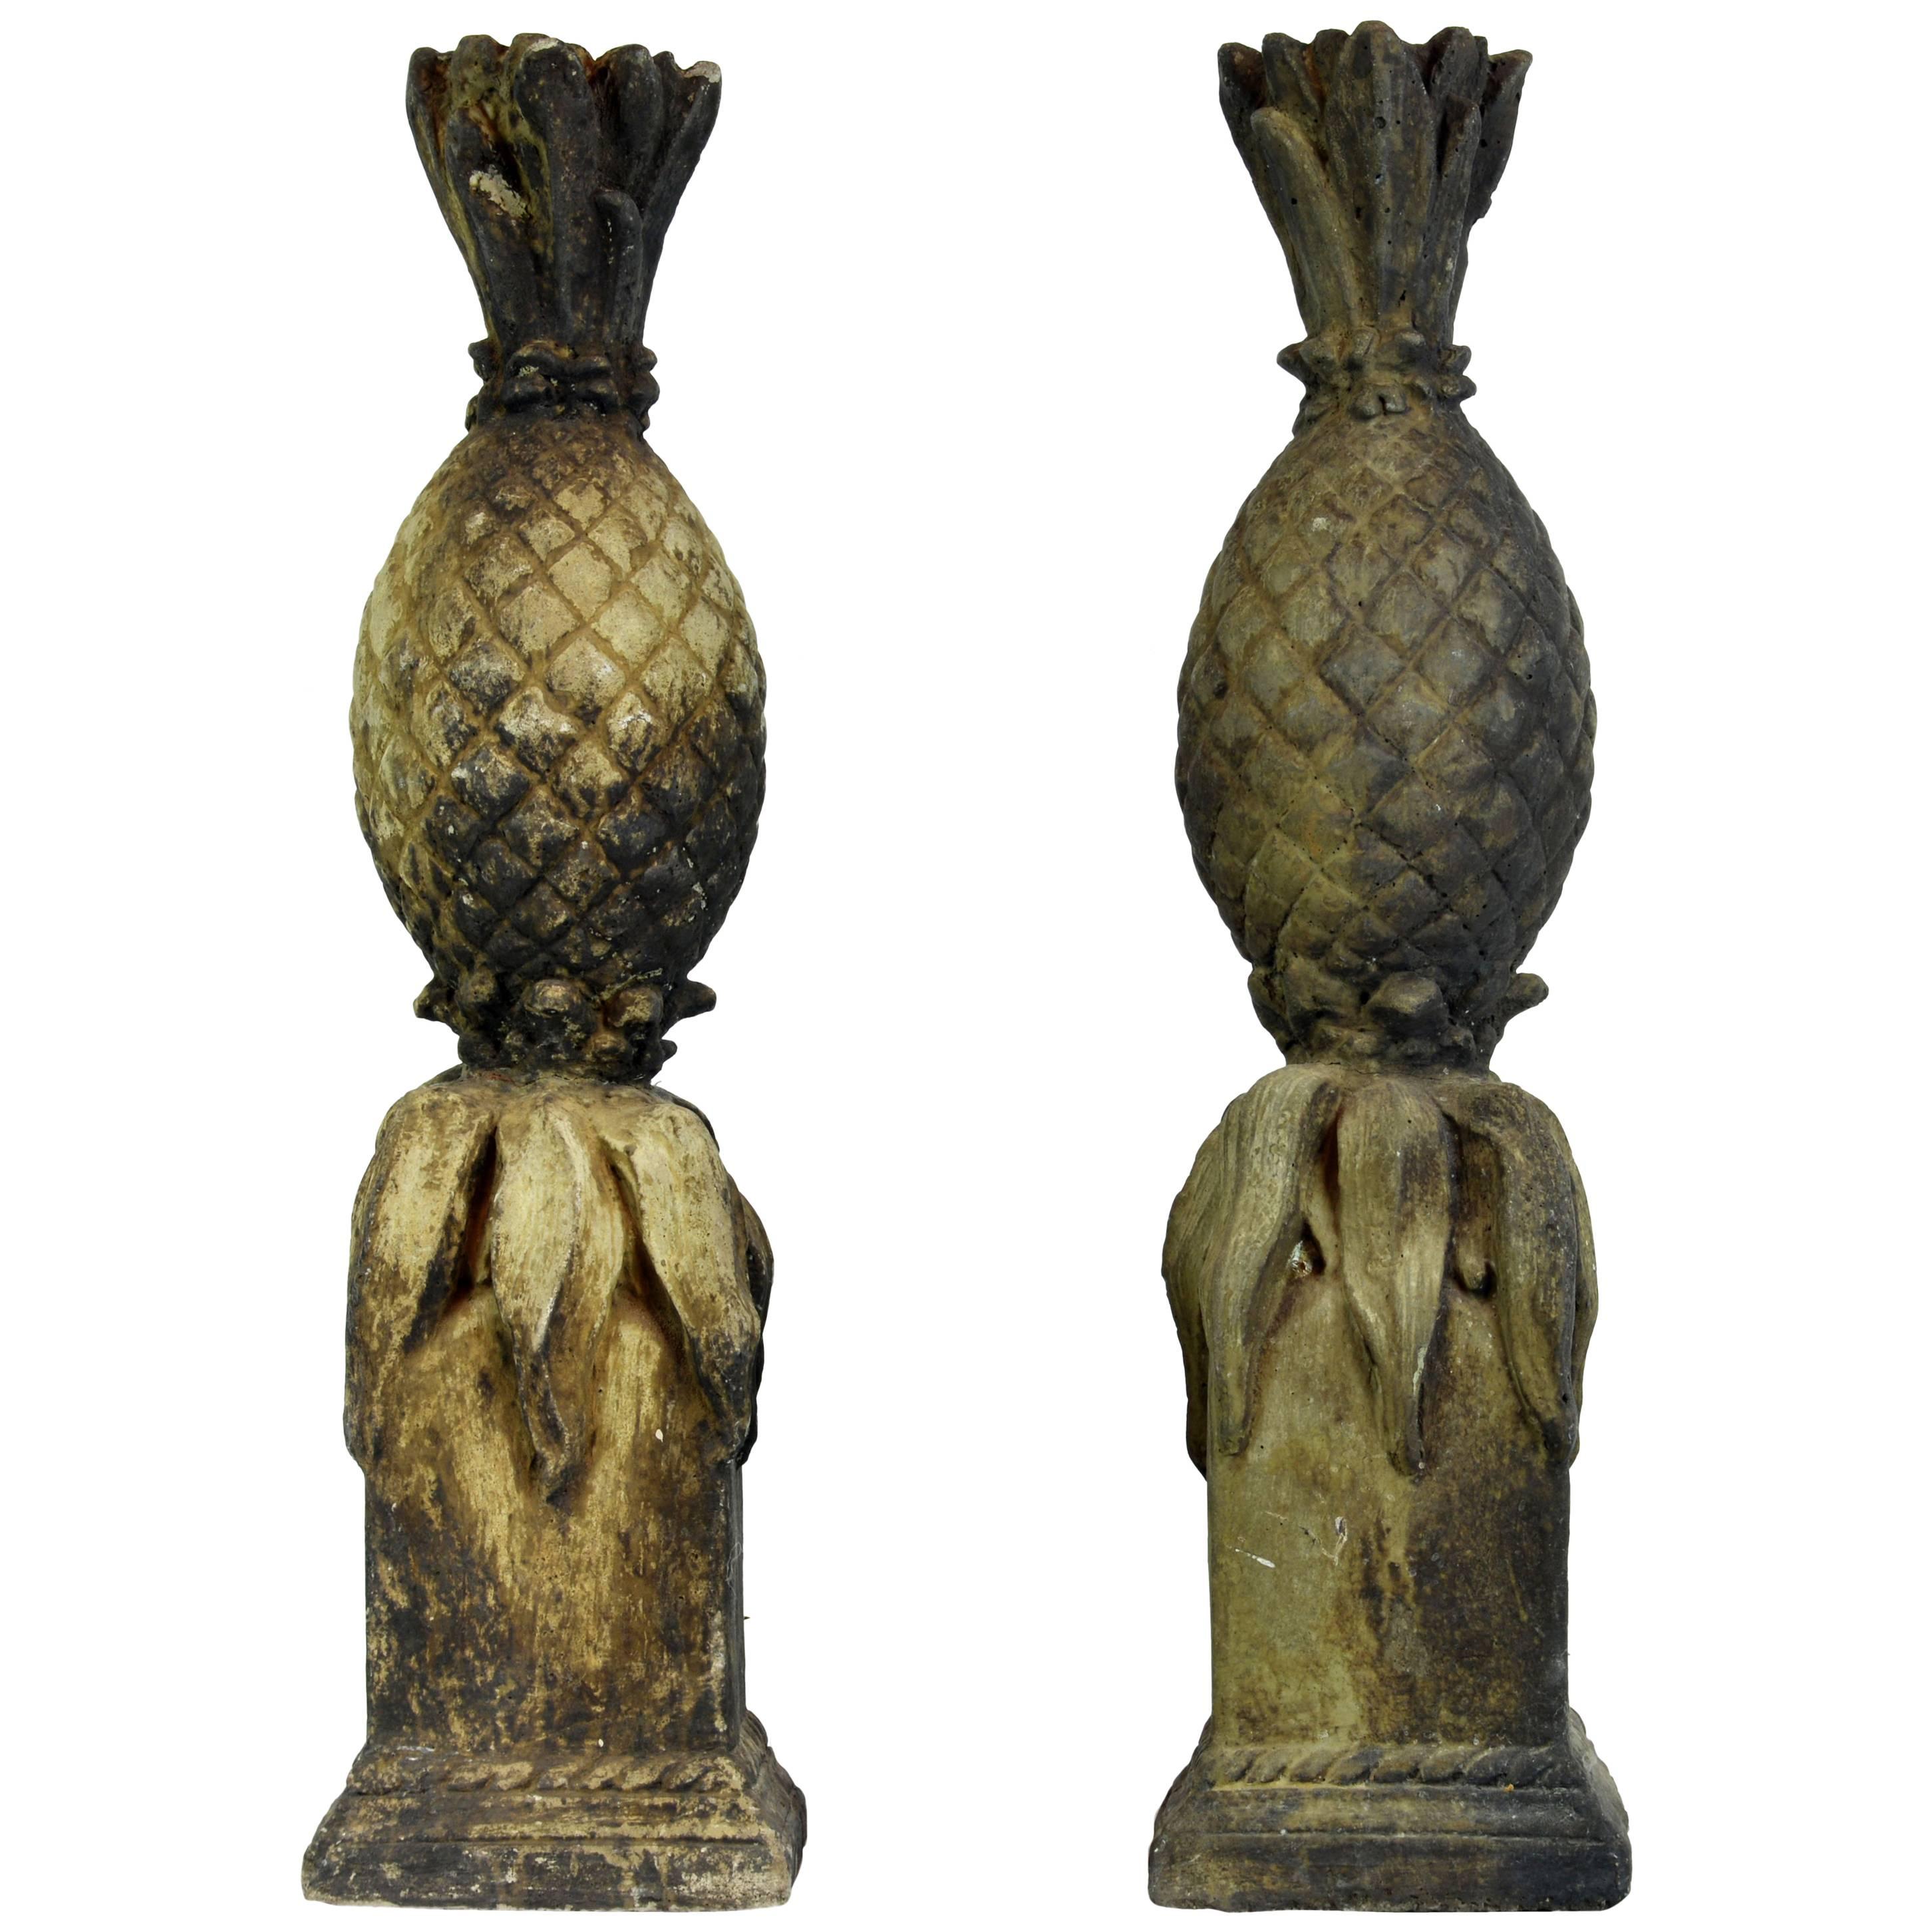 Pair of 19th Century Weathered Cast Stone Figures of Pineapples on Square Bases